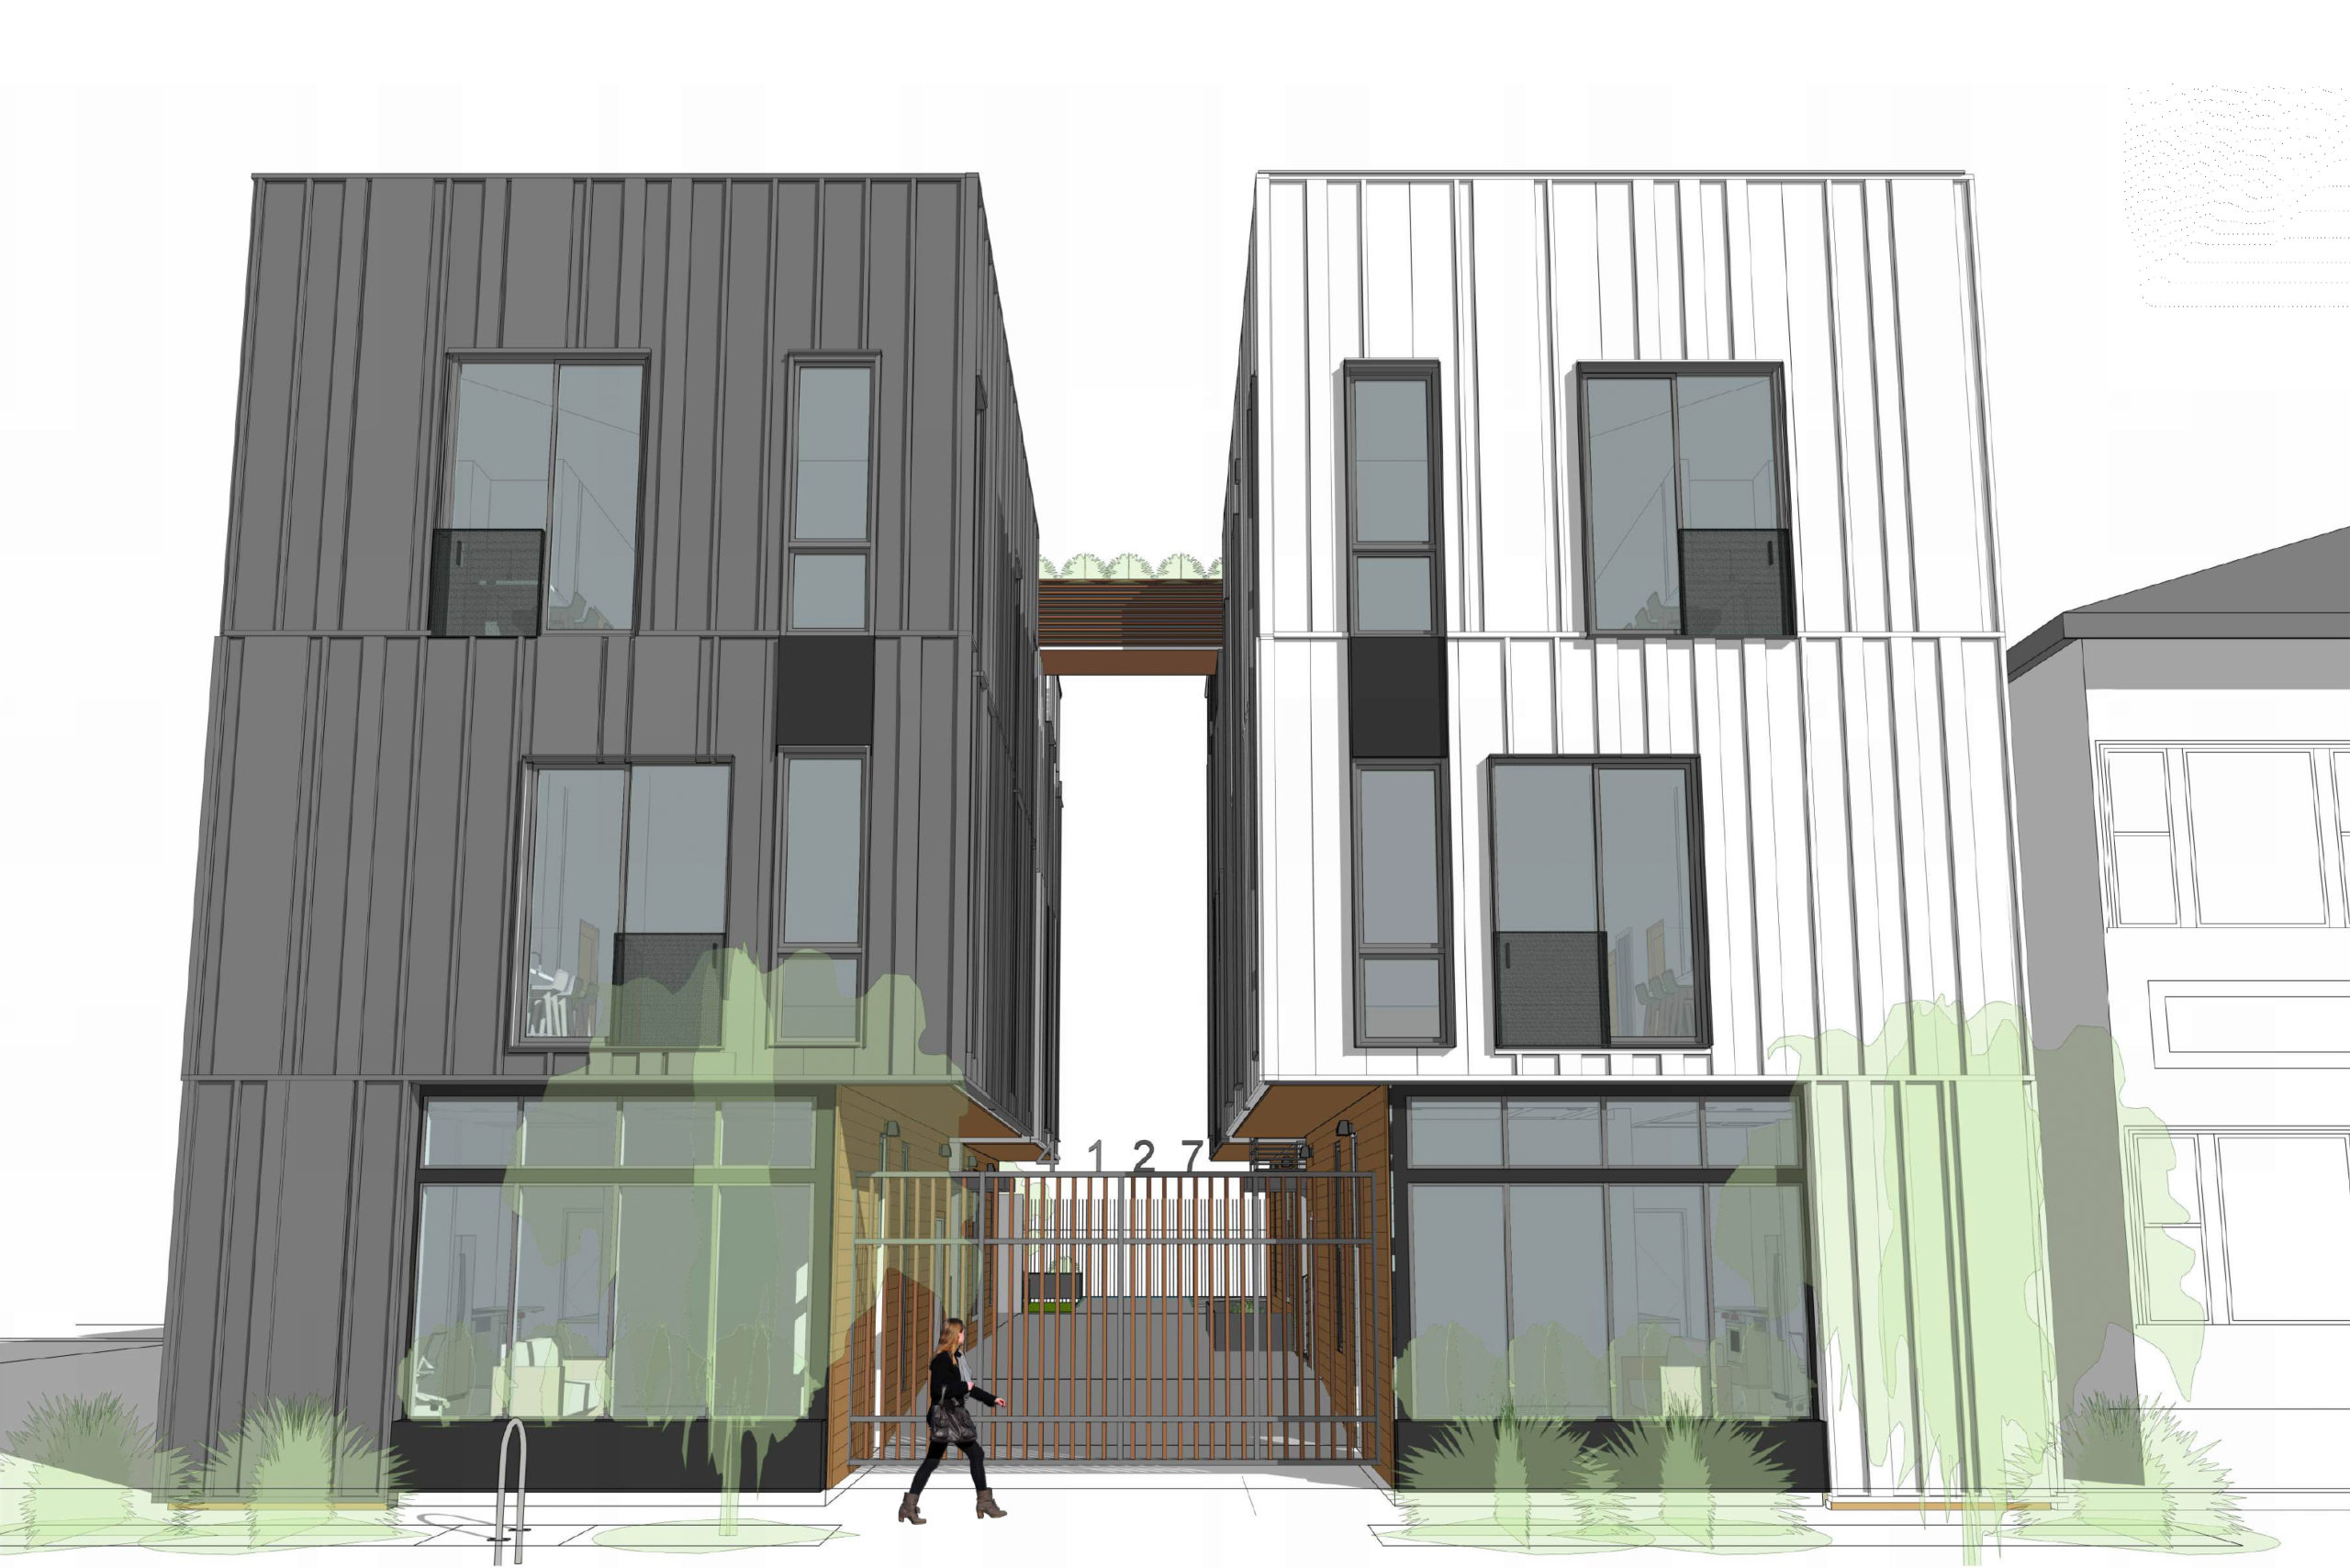 4127 Martin Luther King Jr. Way street view of the cantilevered structures and internal driveway, rendering by Kava Massih Architects